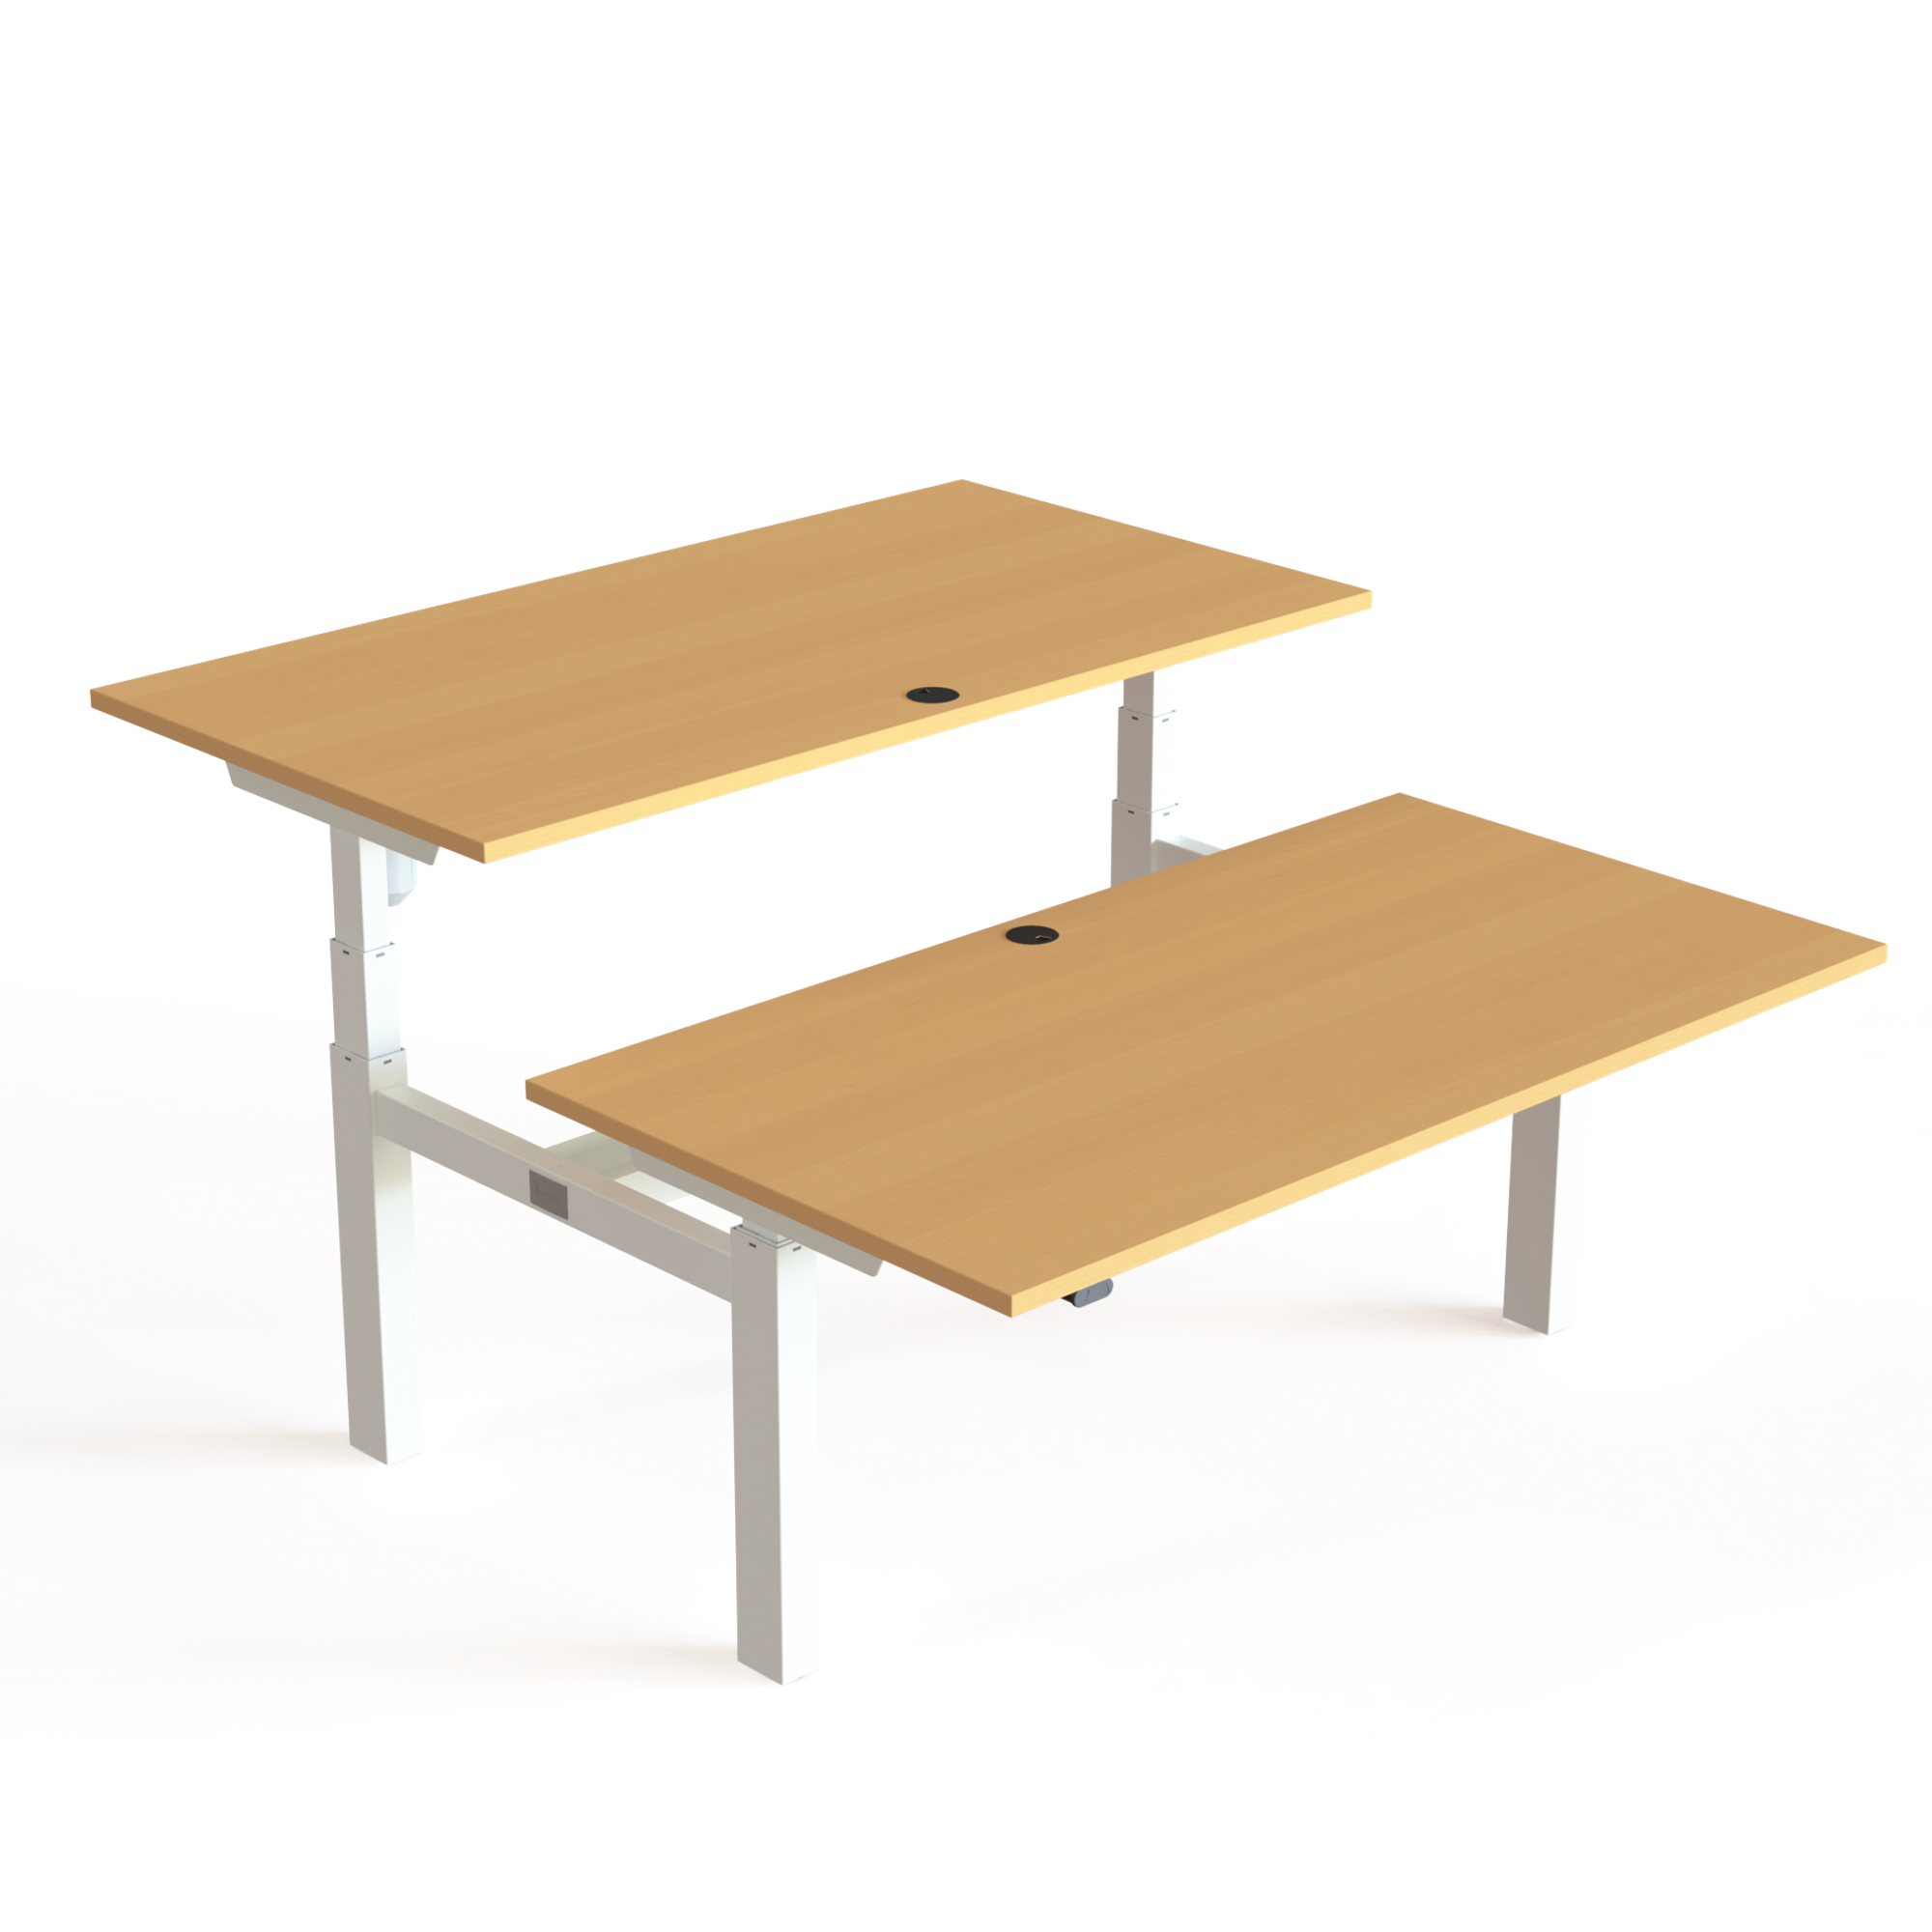 Electric Adjustable Desk | 150x80 cm | Beech with white frame